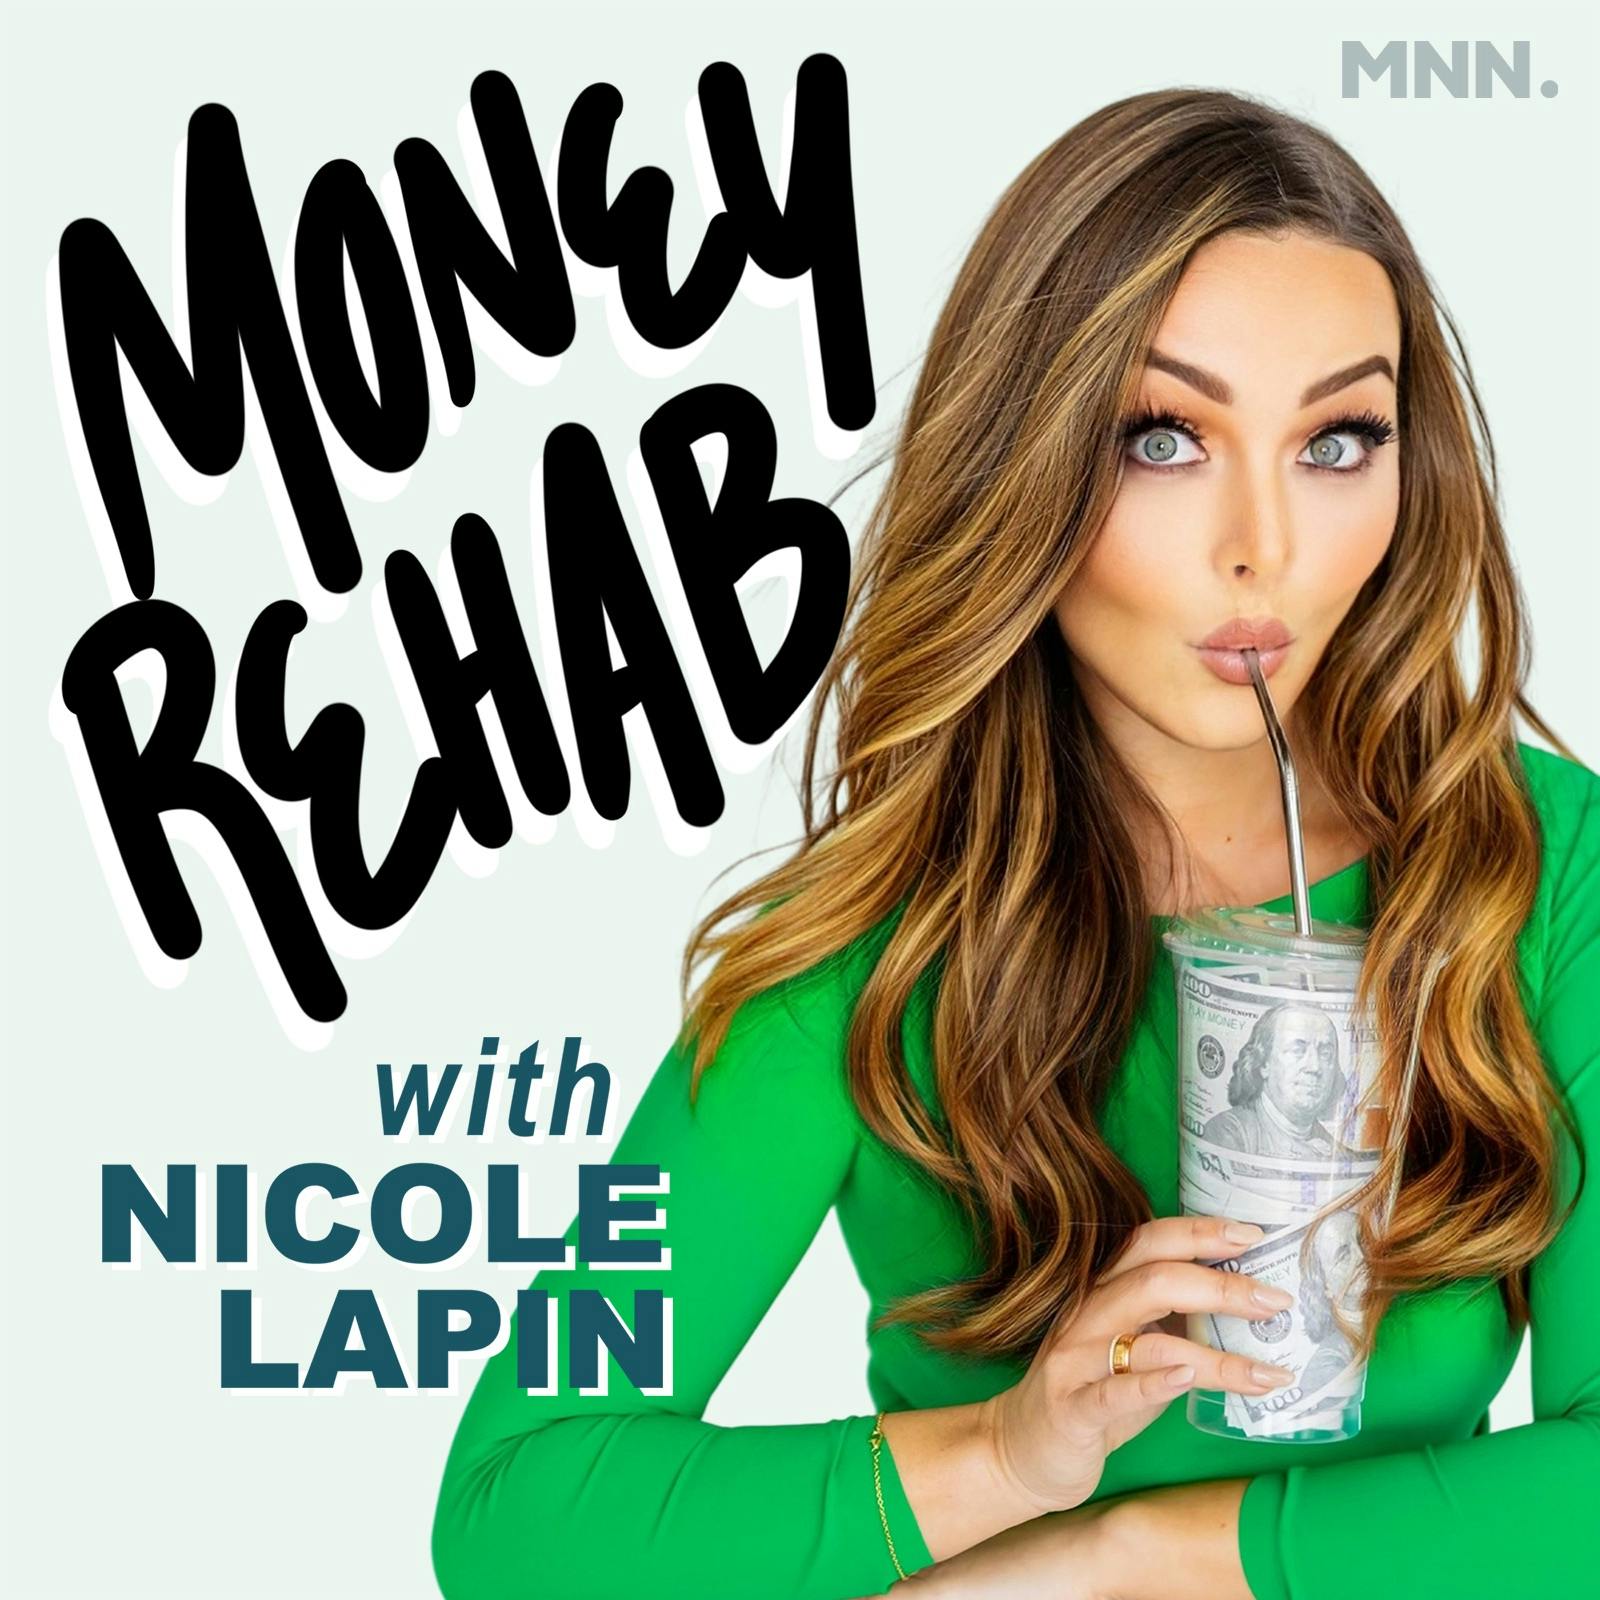 Encore: "We finally have some extra money. How should we spend it?" (Listener Intervention)